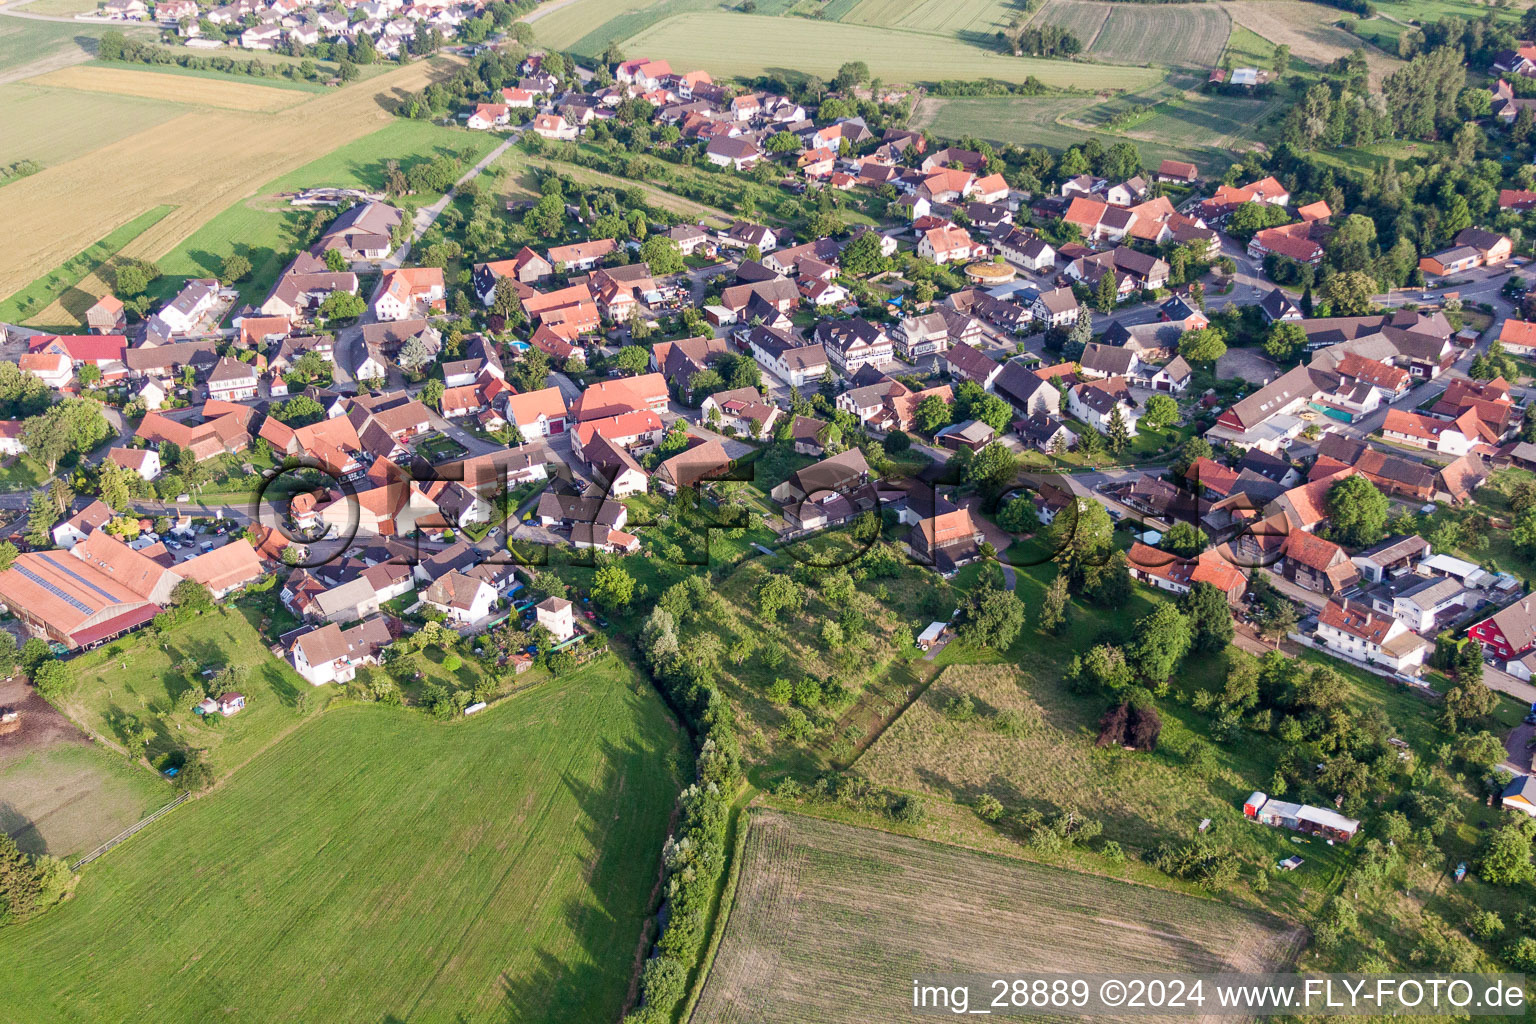 Aerial view of Village view in the district Linx in Rheinau in the state Baden-Wurttemberg, Germany